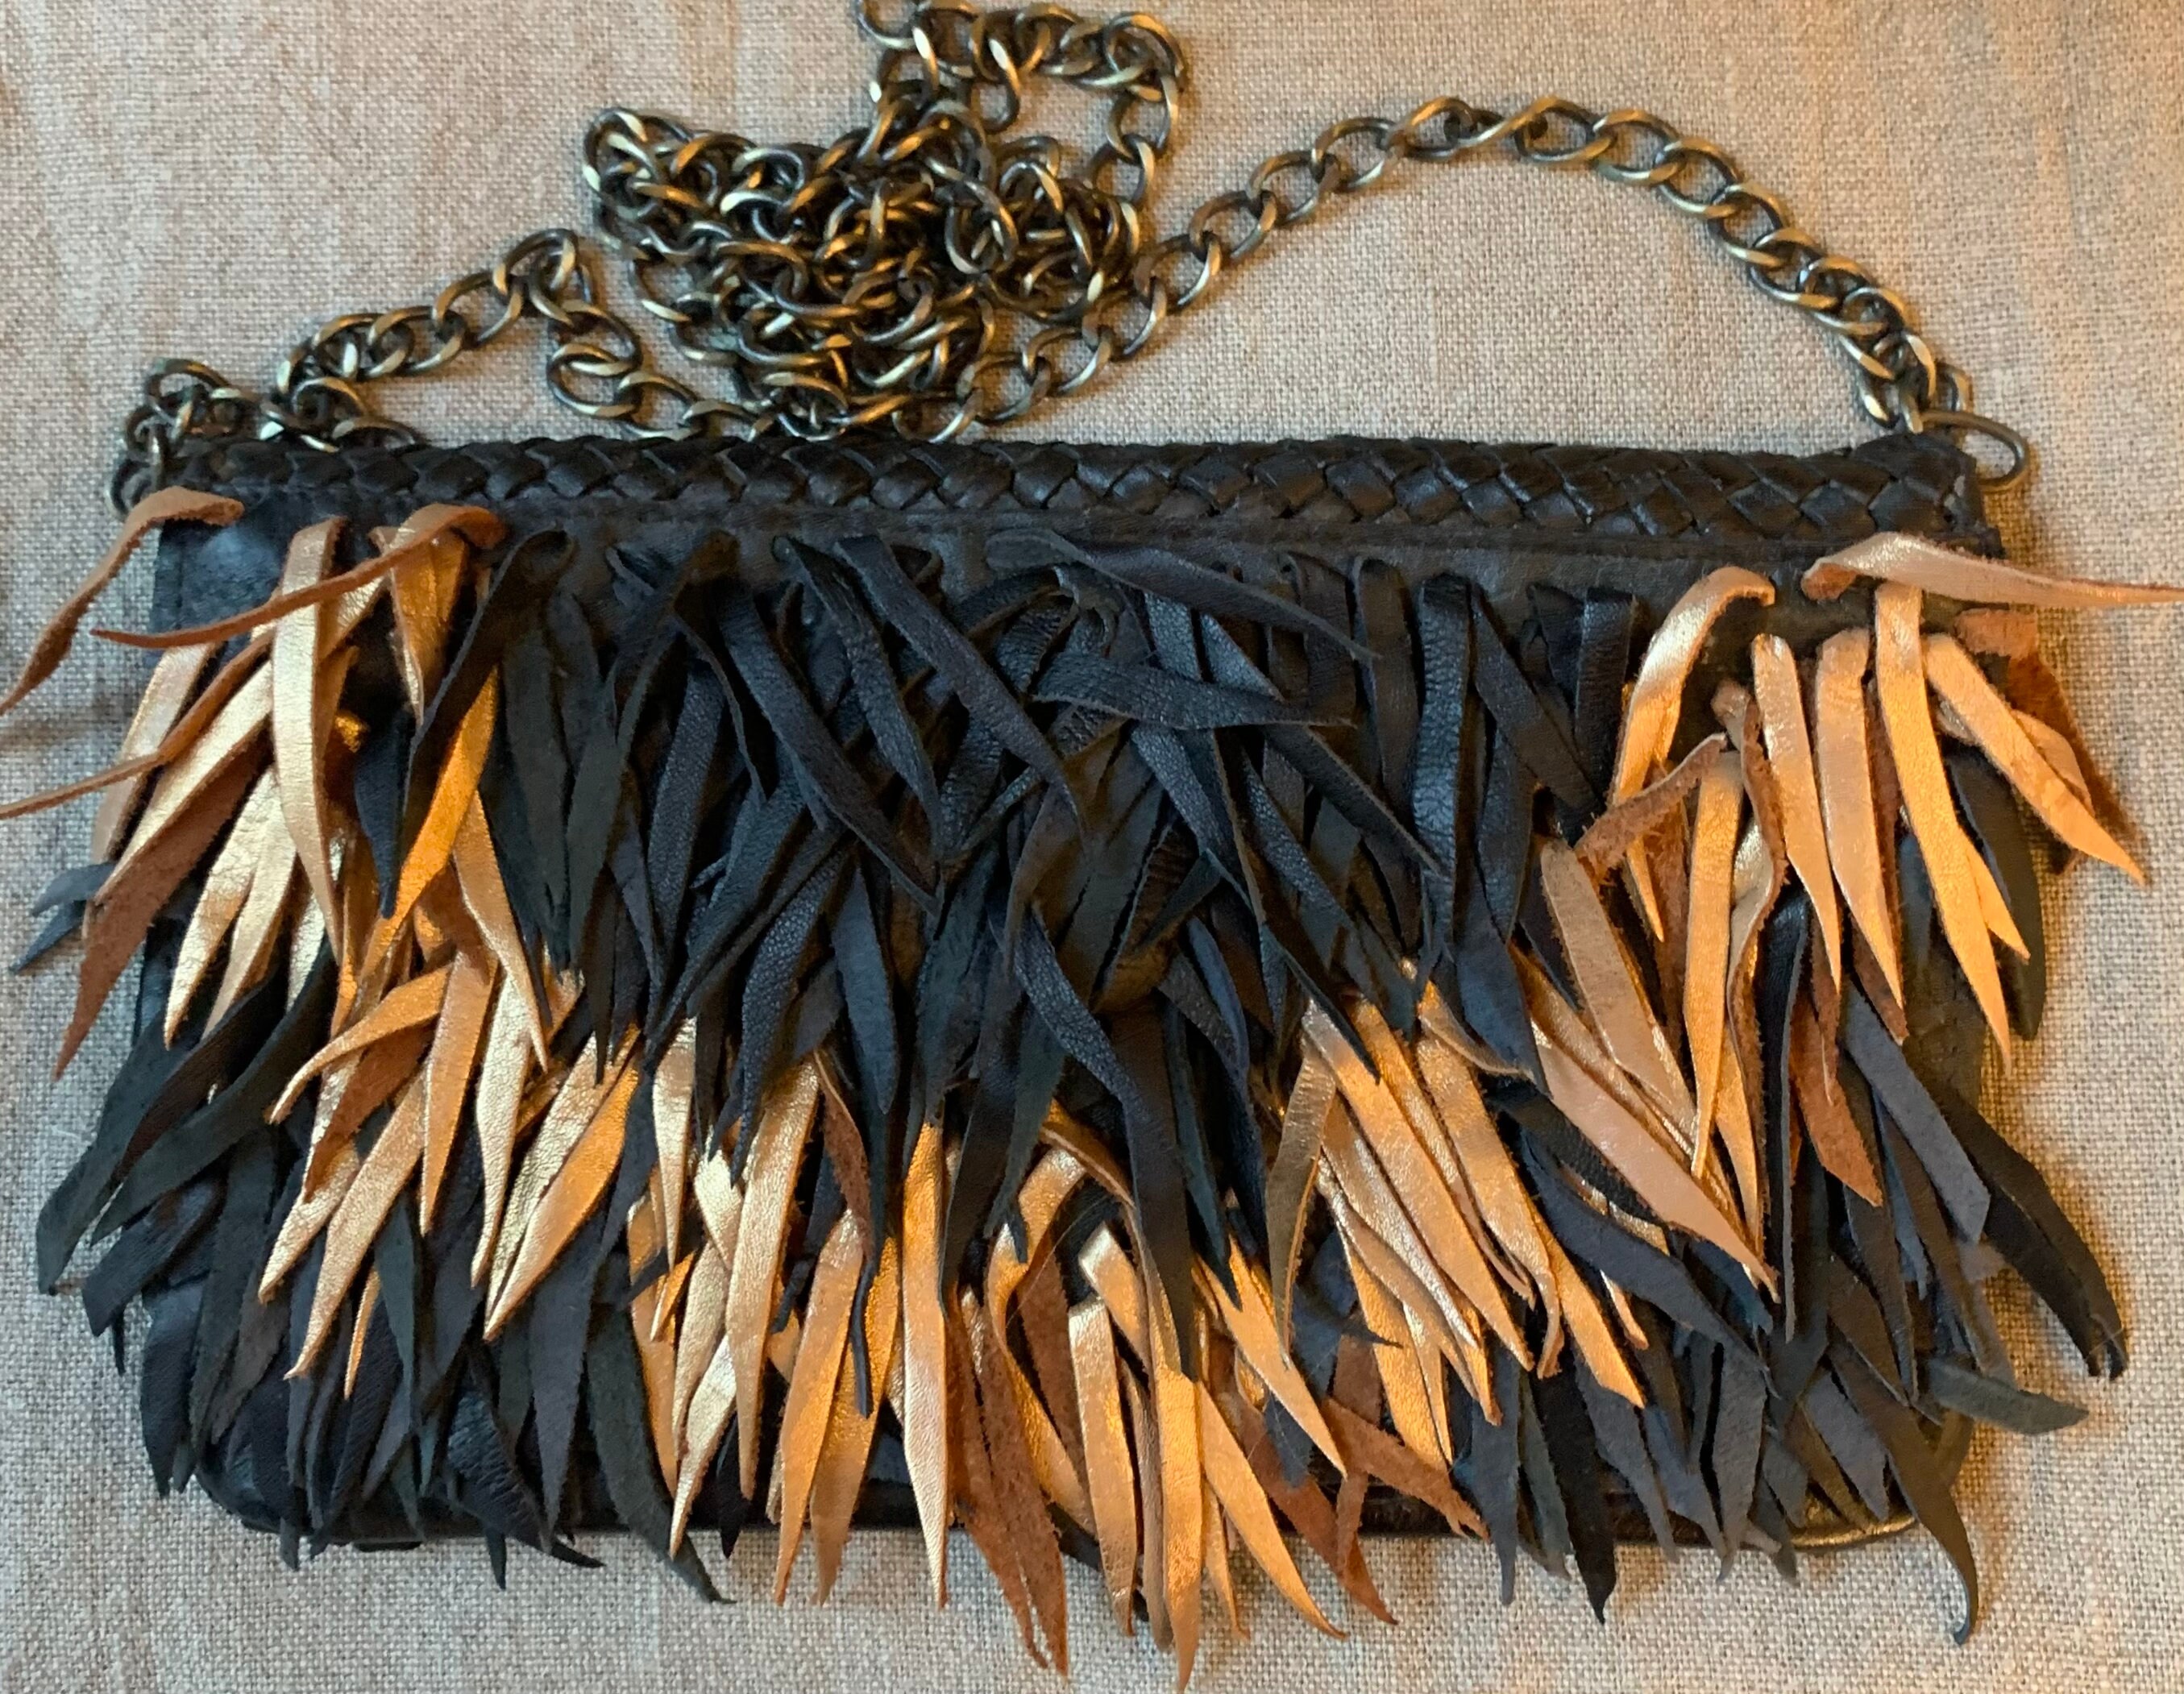 Fringed Leather Clutch Gold and Black Leather Bag Hippie | Etsy